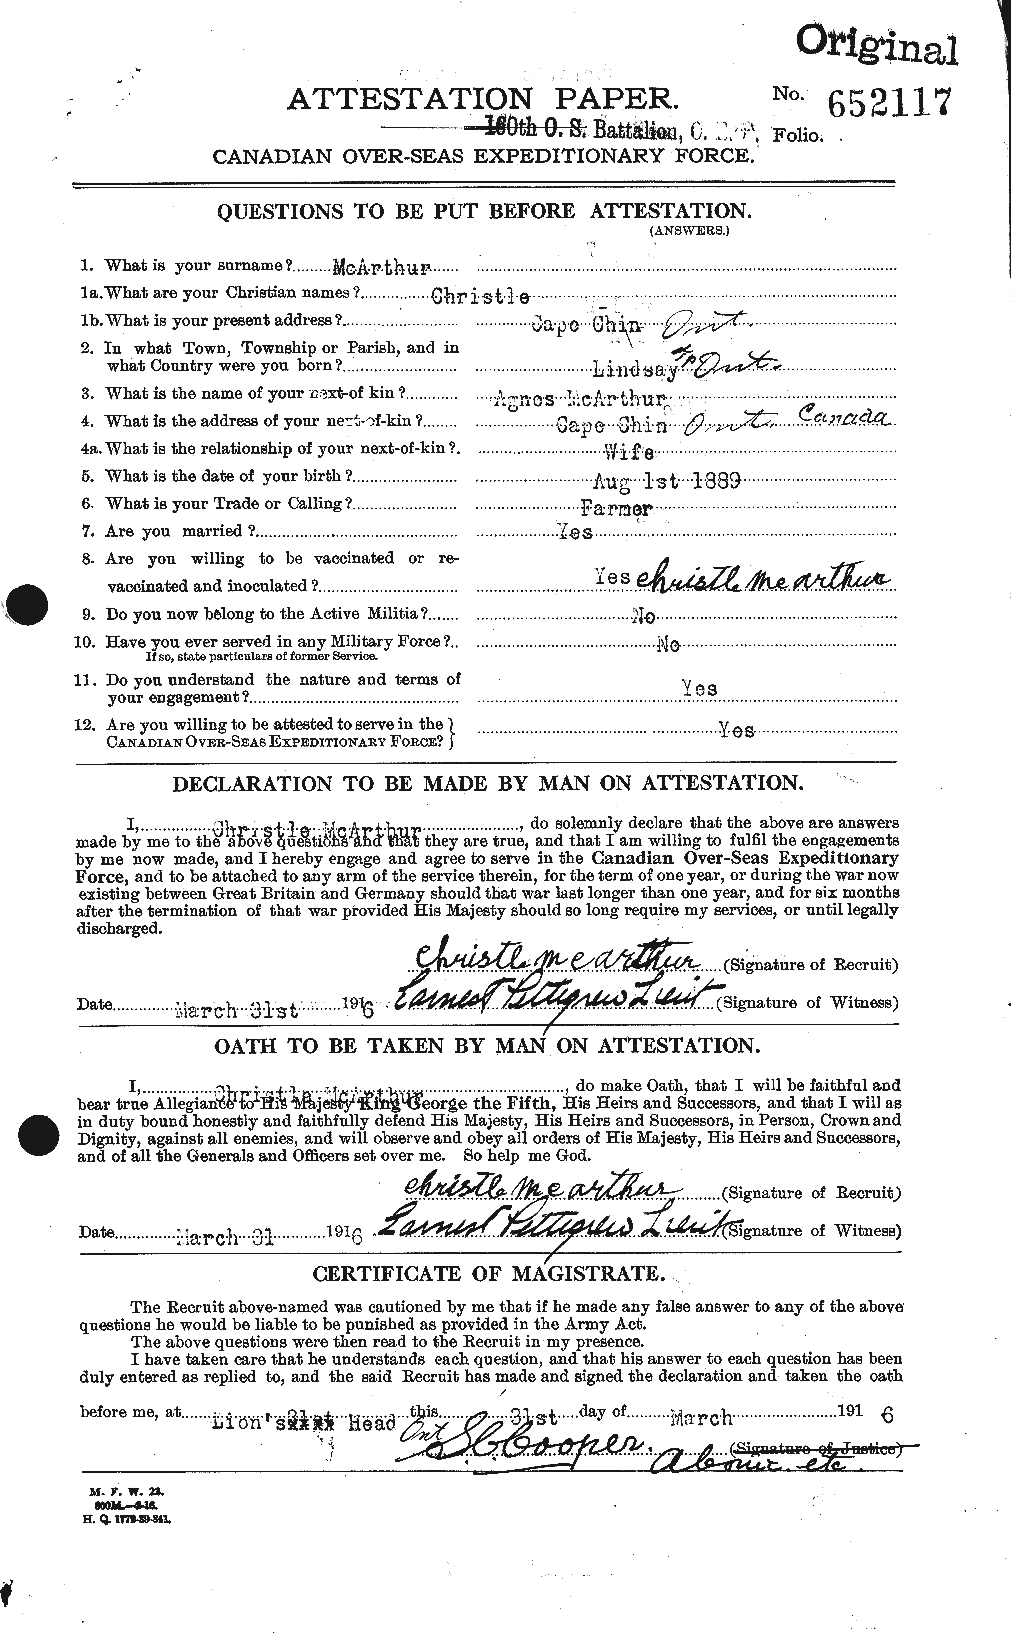 Personnel Records of the First World War - CEF 131113a